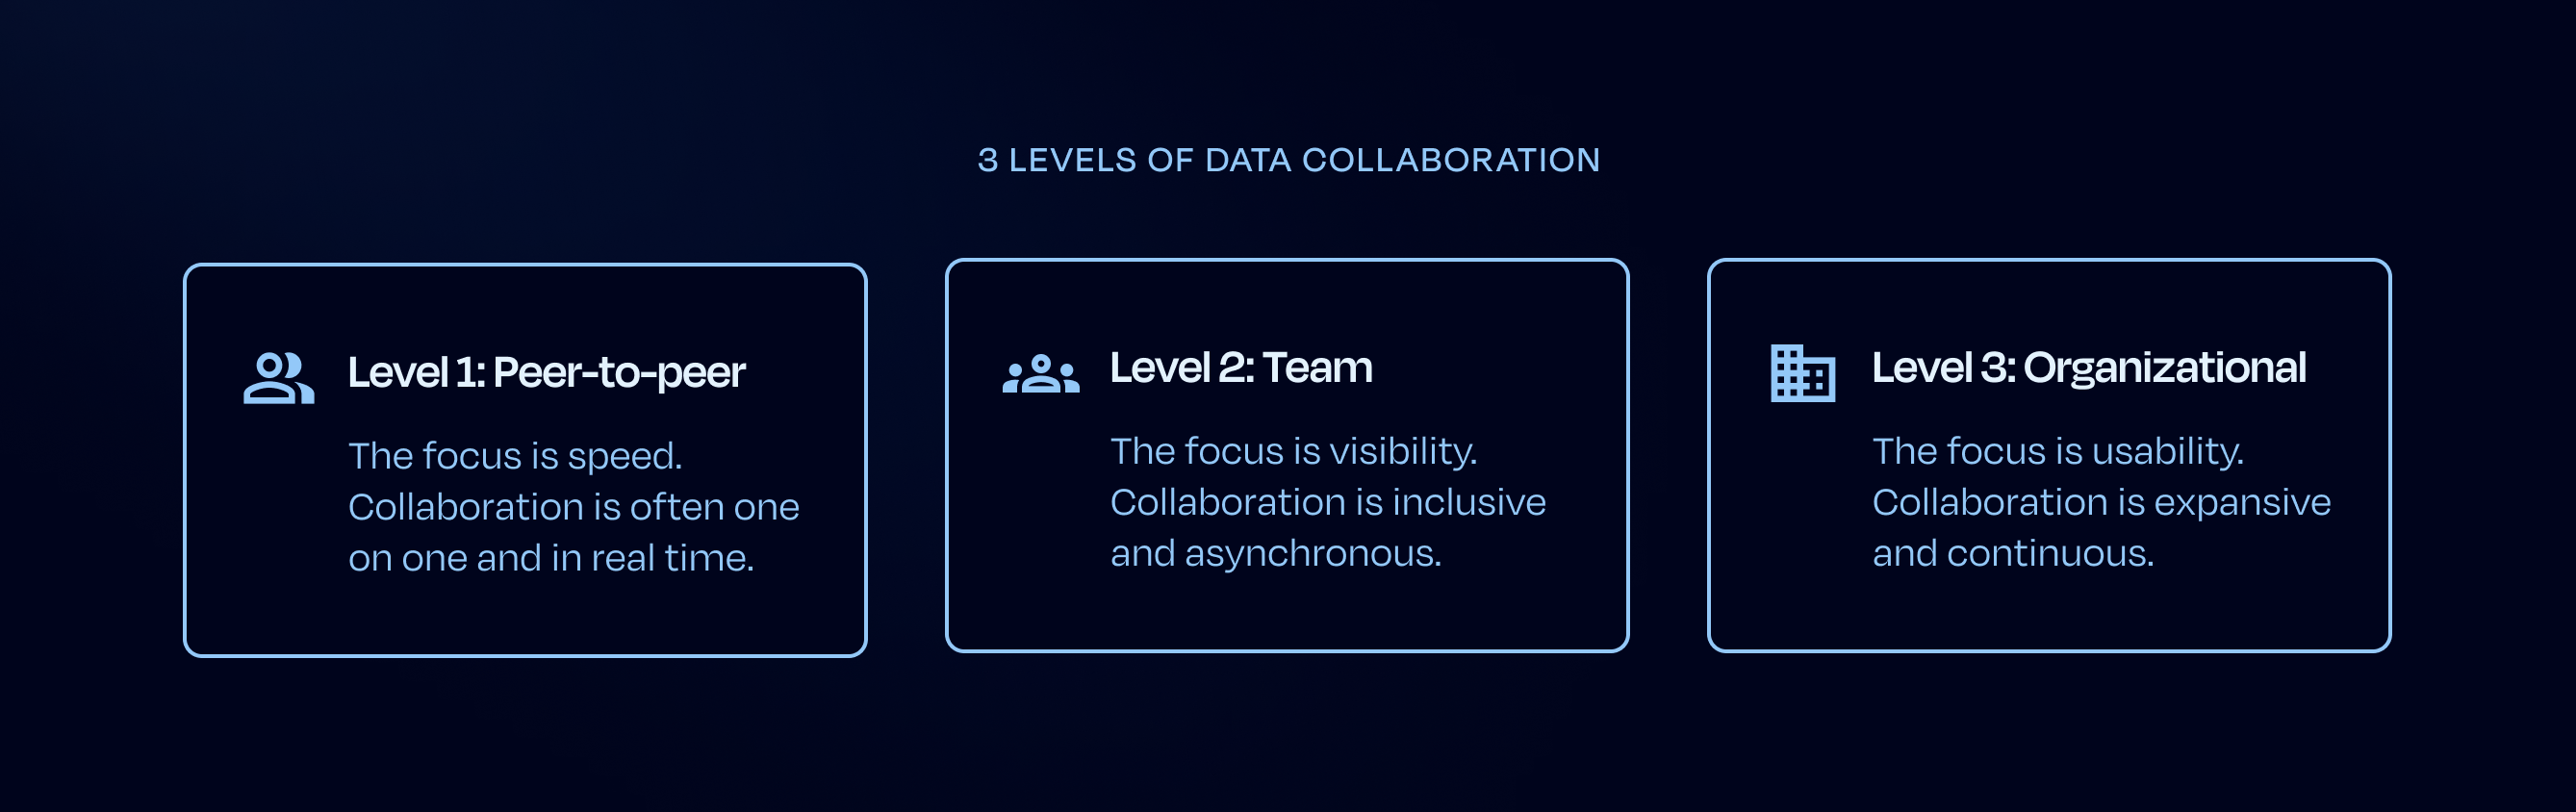 levels-of-data-collaboration.png